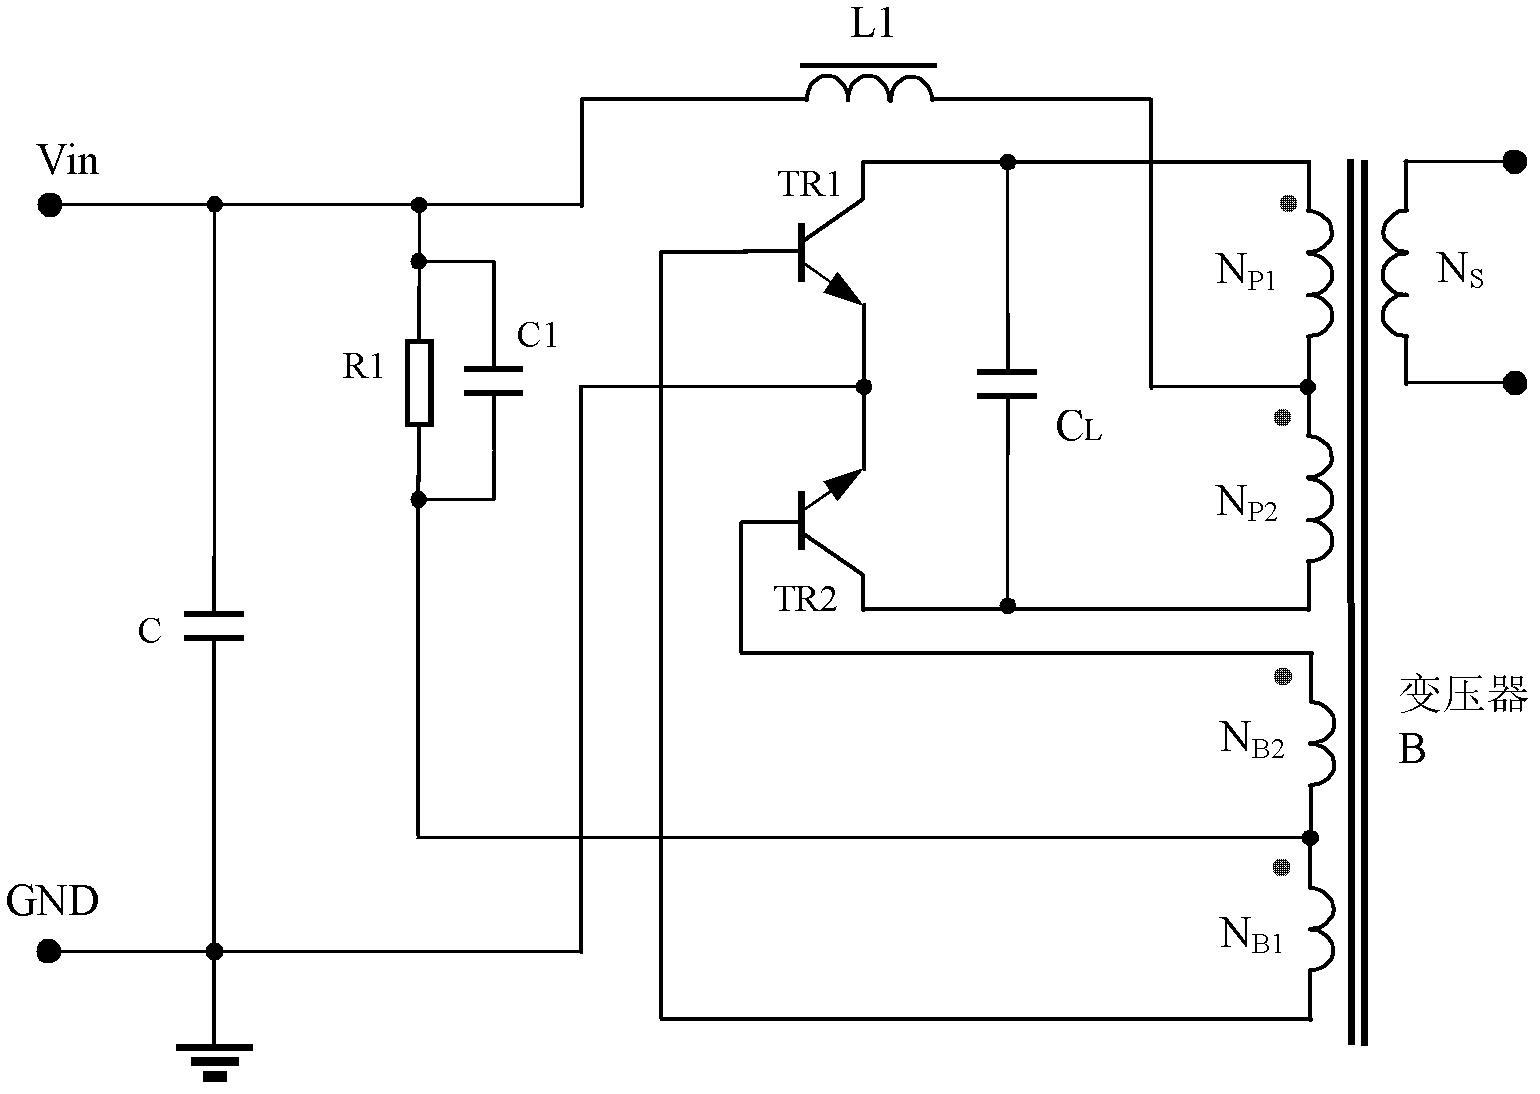 Self-excited push-pull type converter